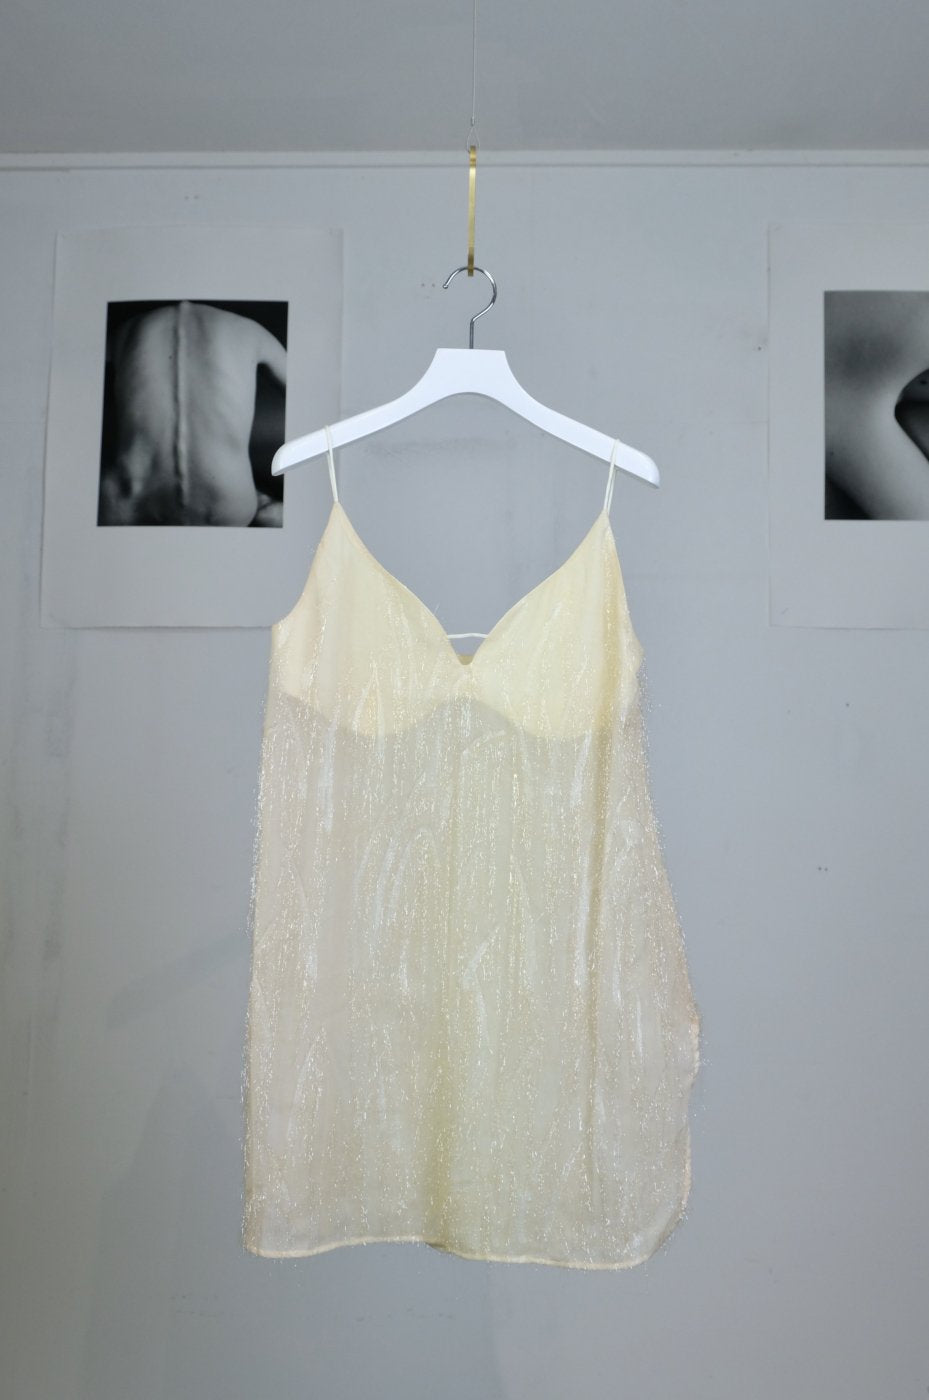 [50% OFF] Mame Kurogouchi "WILDFLOWER FILM JAQUARD OMBRE DYED CAMISOLE TOP"